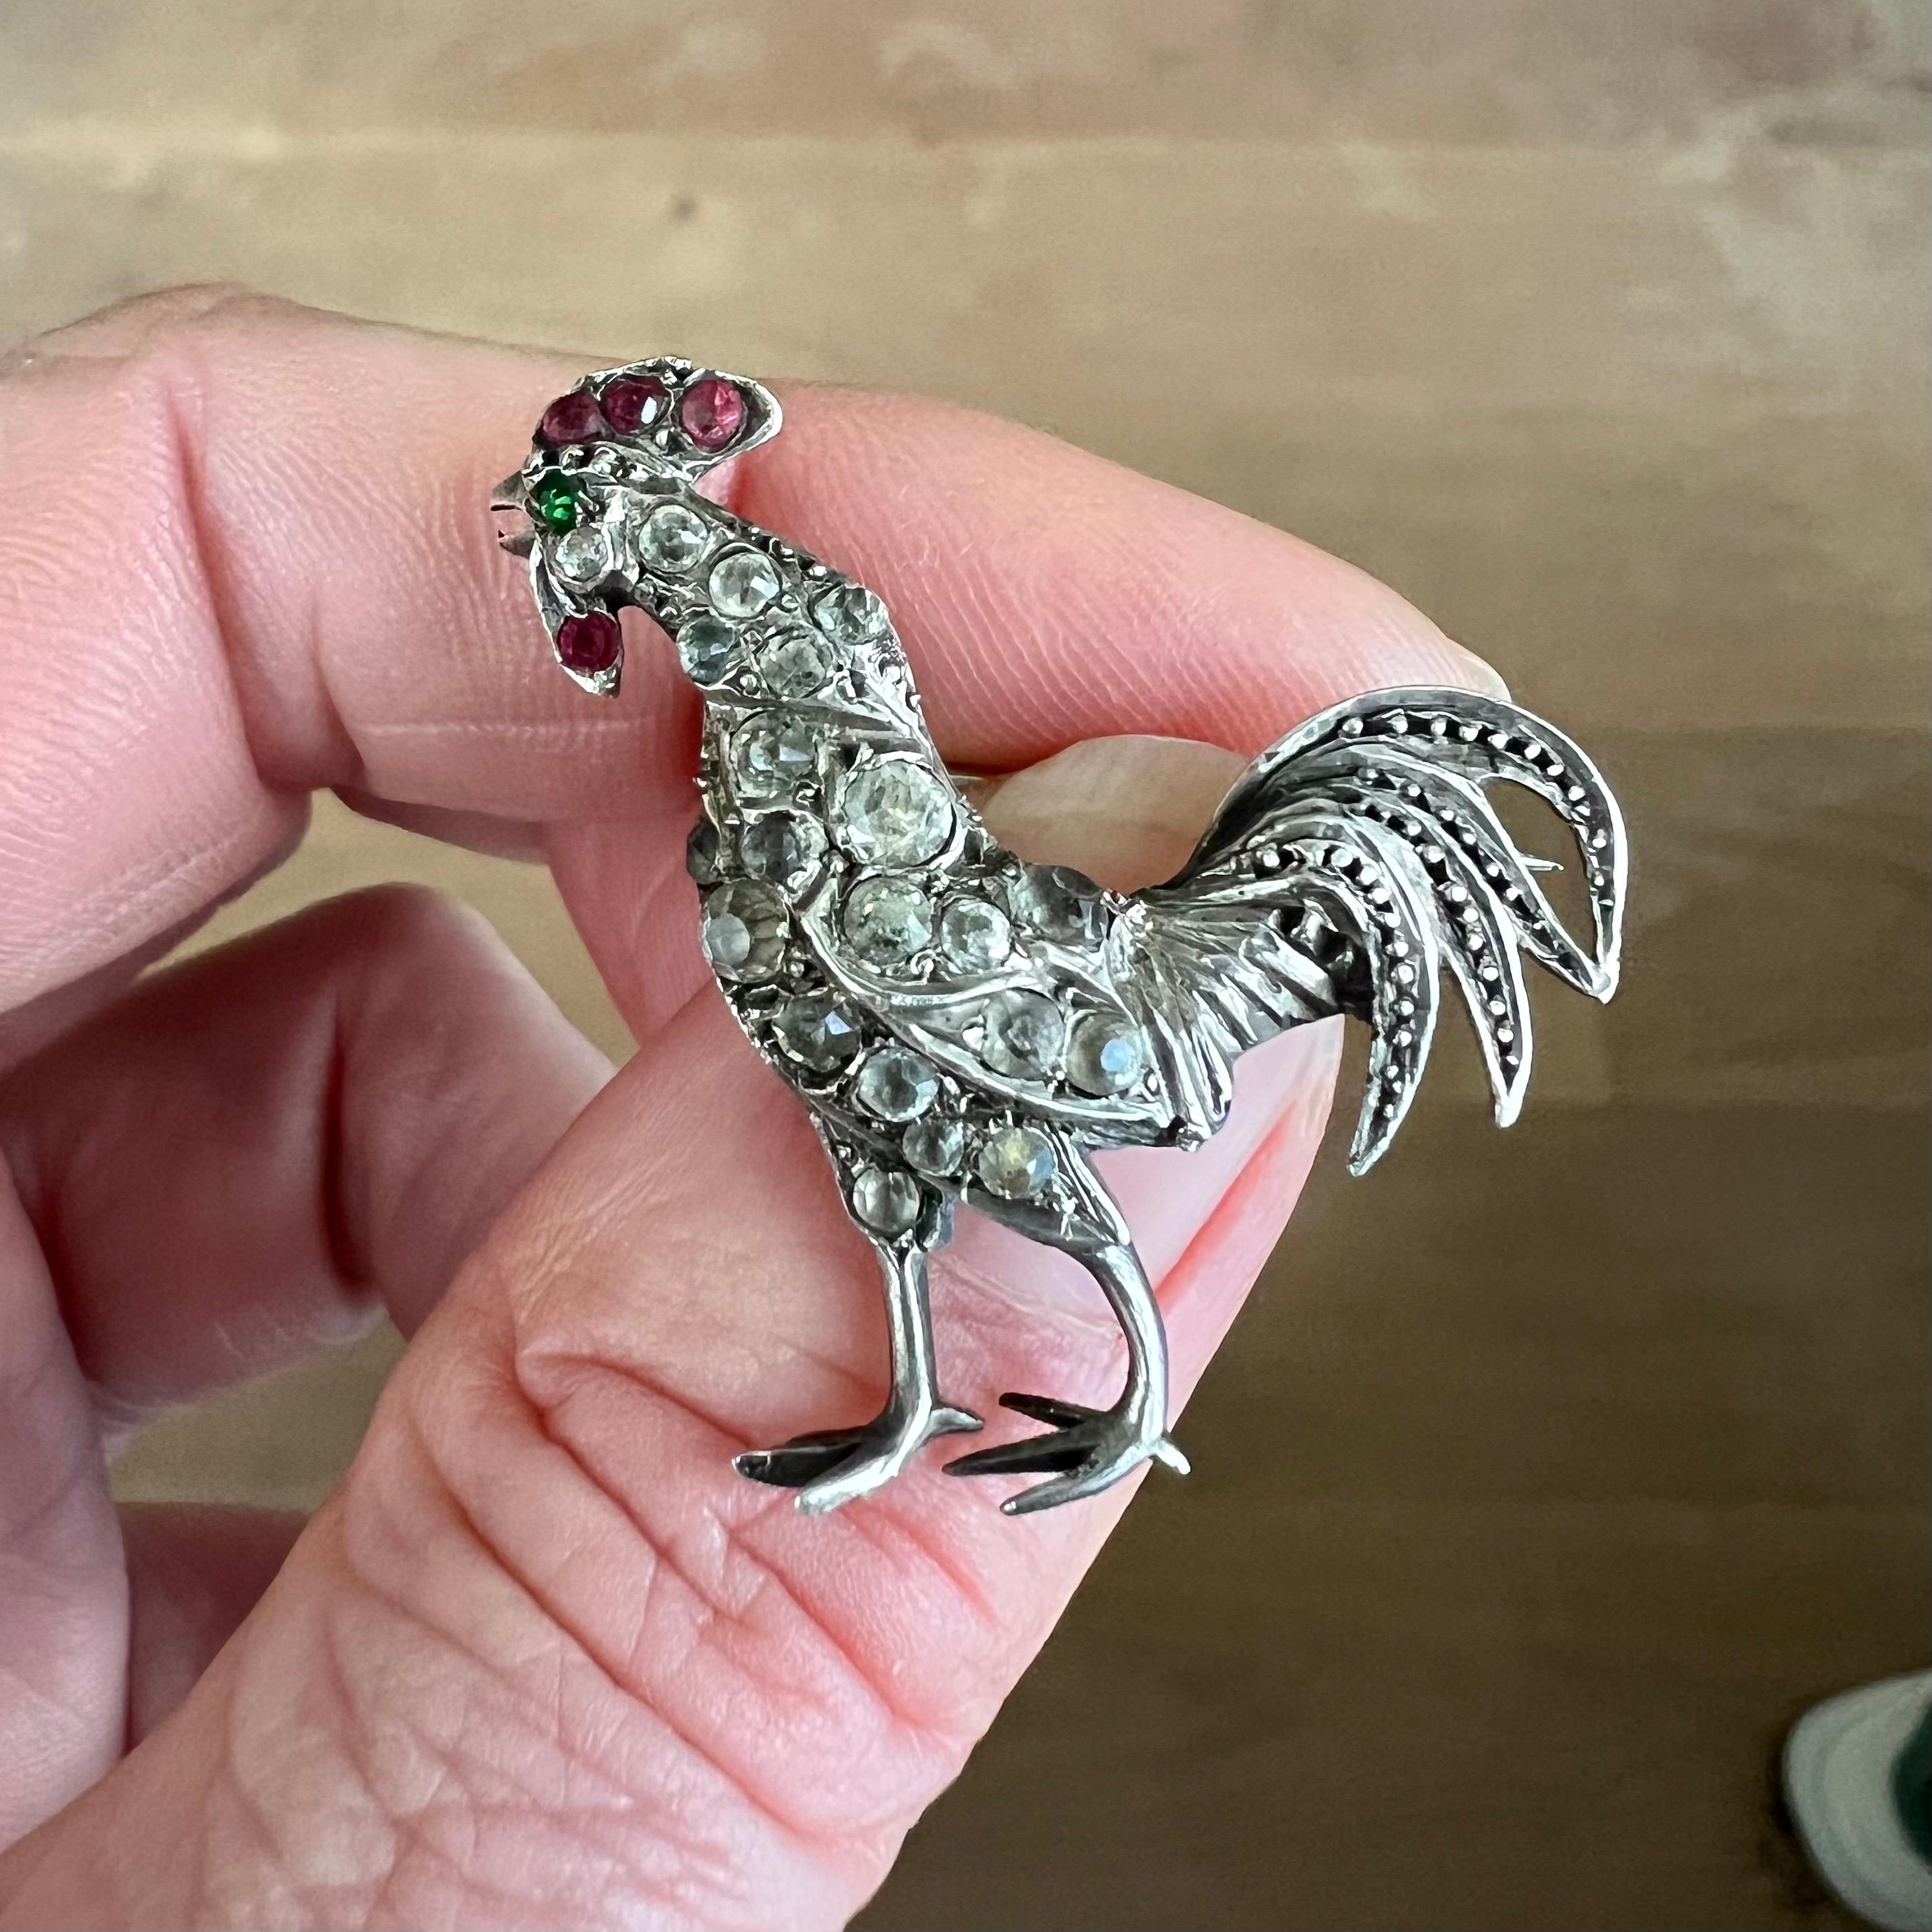 This is an antique silver rooster brooch set with translucent and colored paste glass stones. The rooster's body is set with diamond-like glass stones and his comb and wattle is set with red paste stones. The rooster's eye is made with a green paste